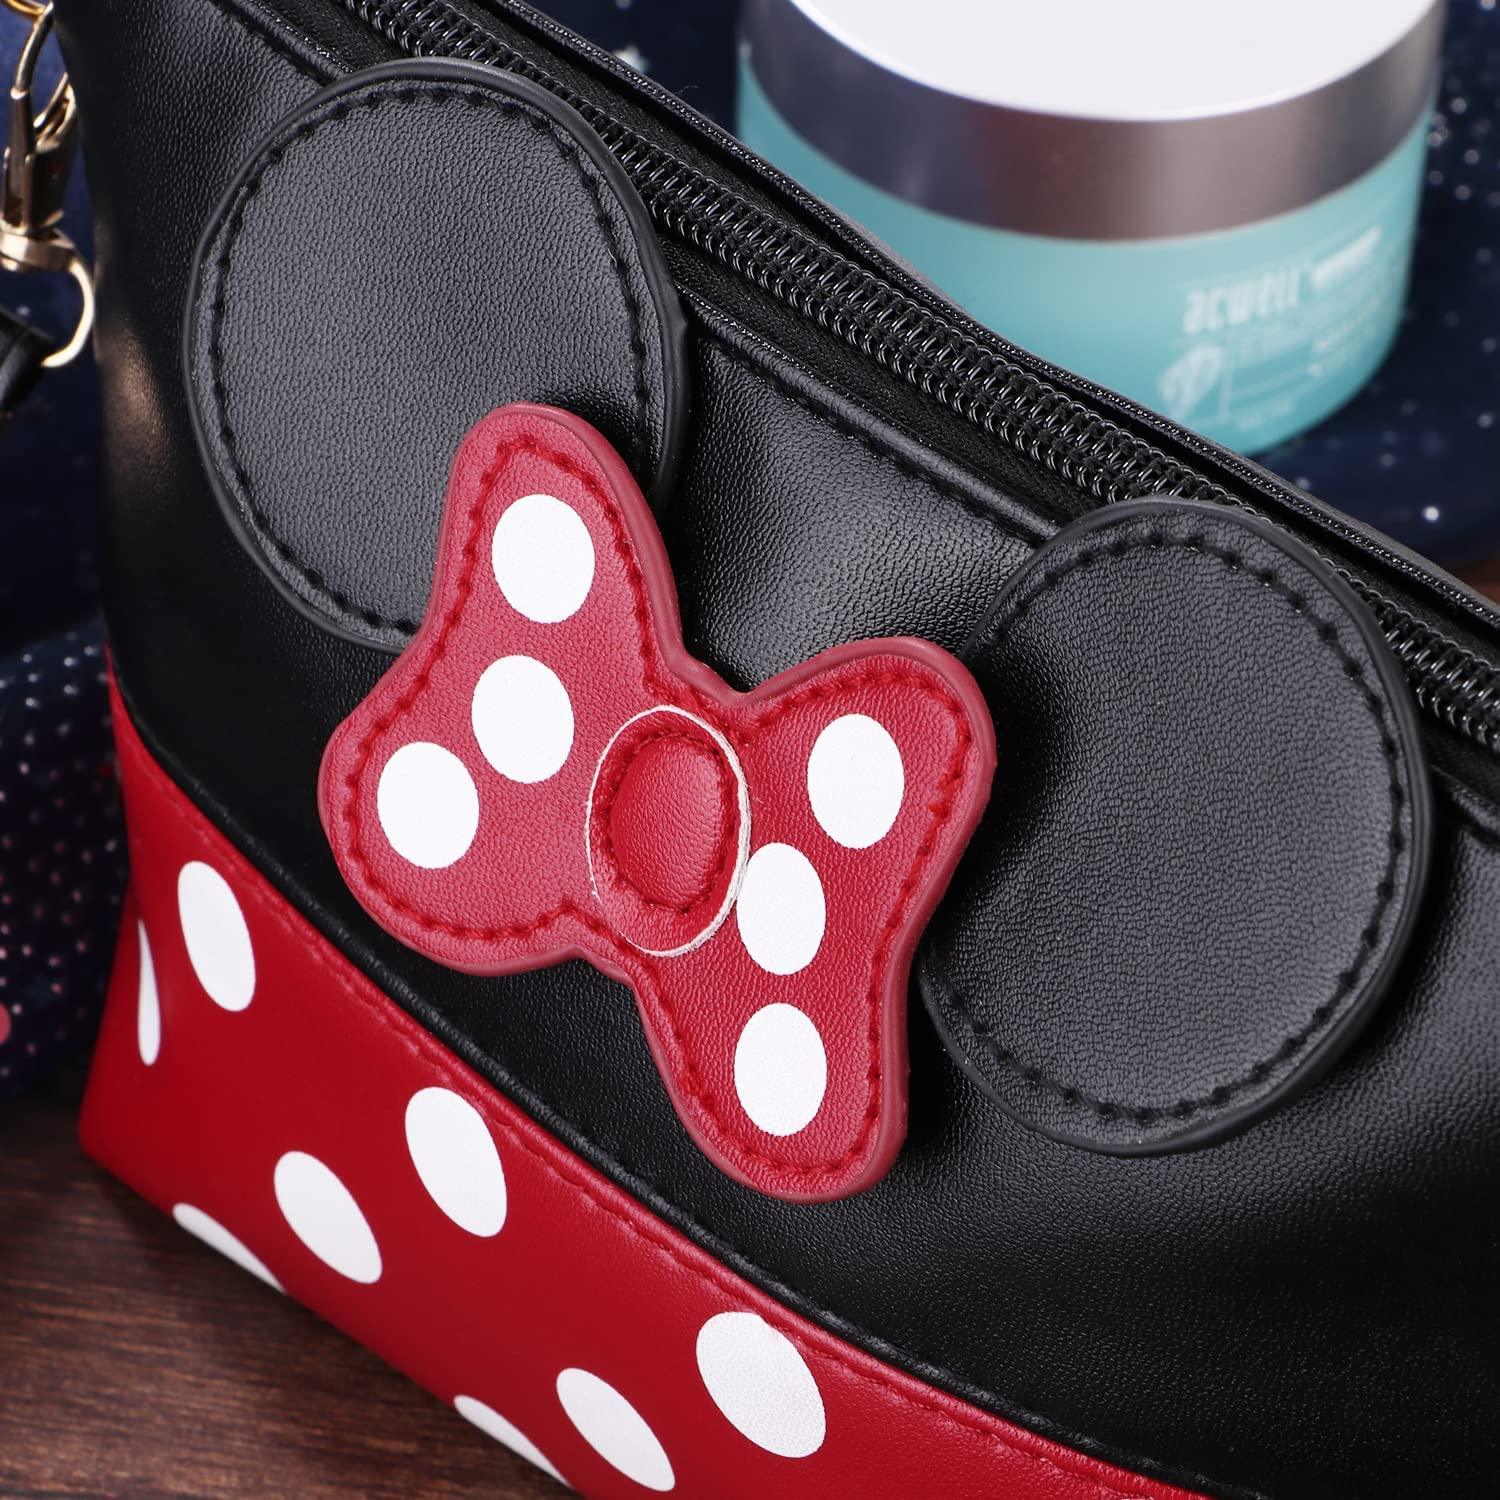 Minnie Mouse Ears Bag with Zipper Cartoon Leather Travel Makeup Handbag with Ears and Bow-knot, Cute Portable Cosmetic Bag Toiletry Pouch for Women Teen Girls Kids (Black) - BumbleToys - Bags, Girls, Leather